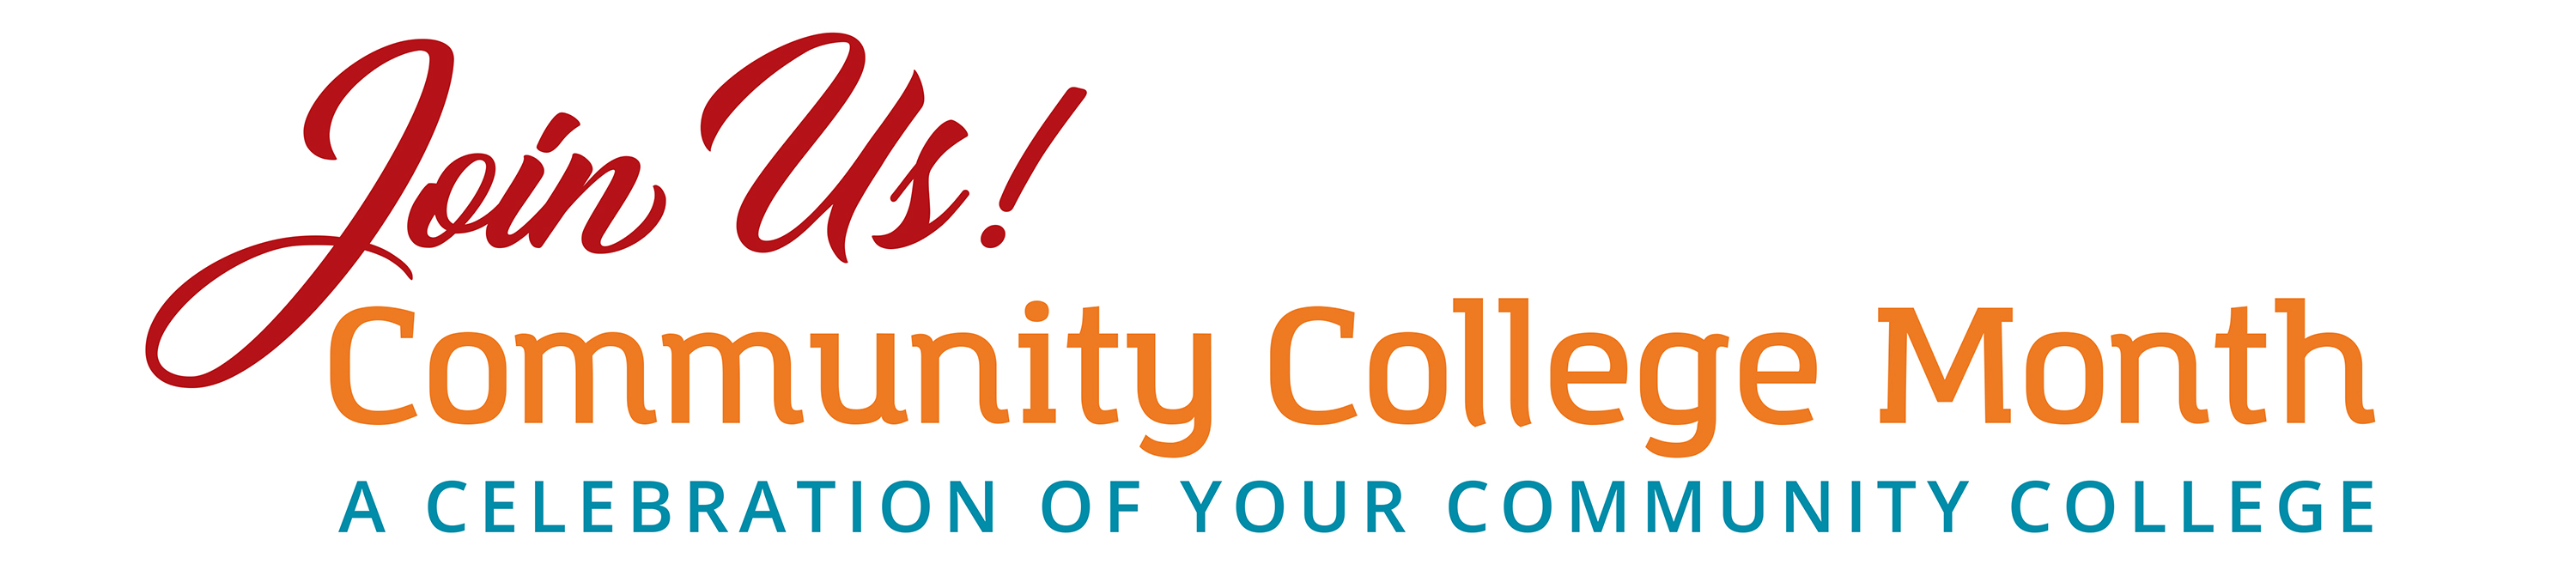 Join Us for Community College Month: A Celebration of Your Community College.